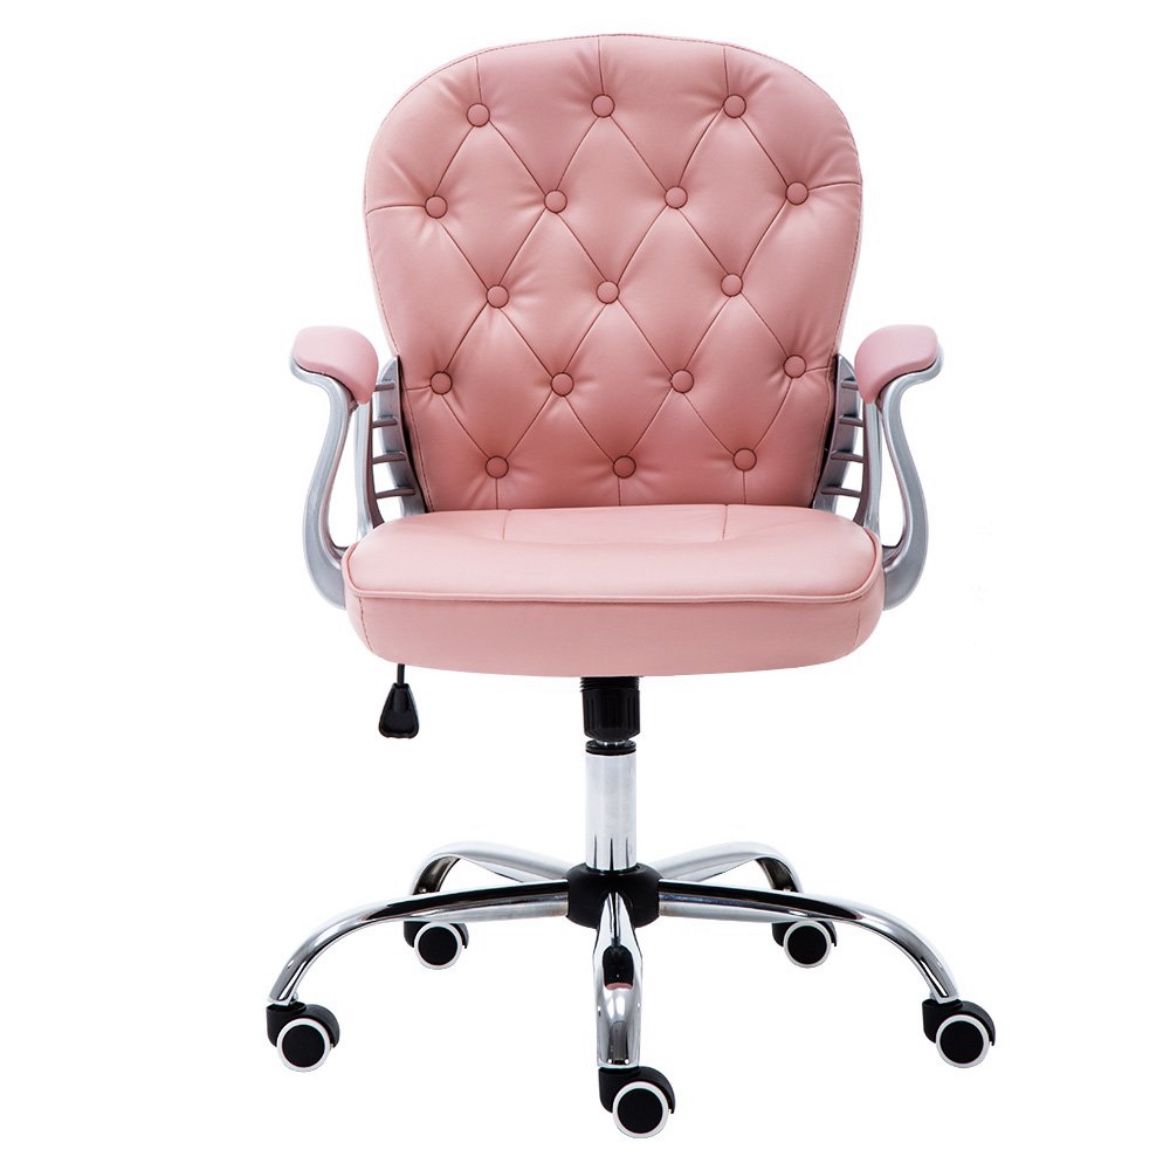 New Office Chair - Pink